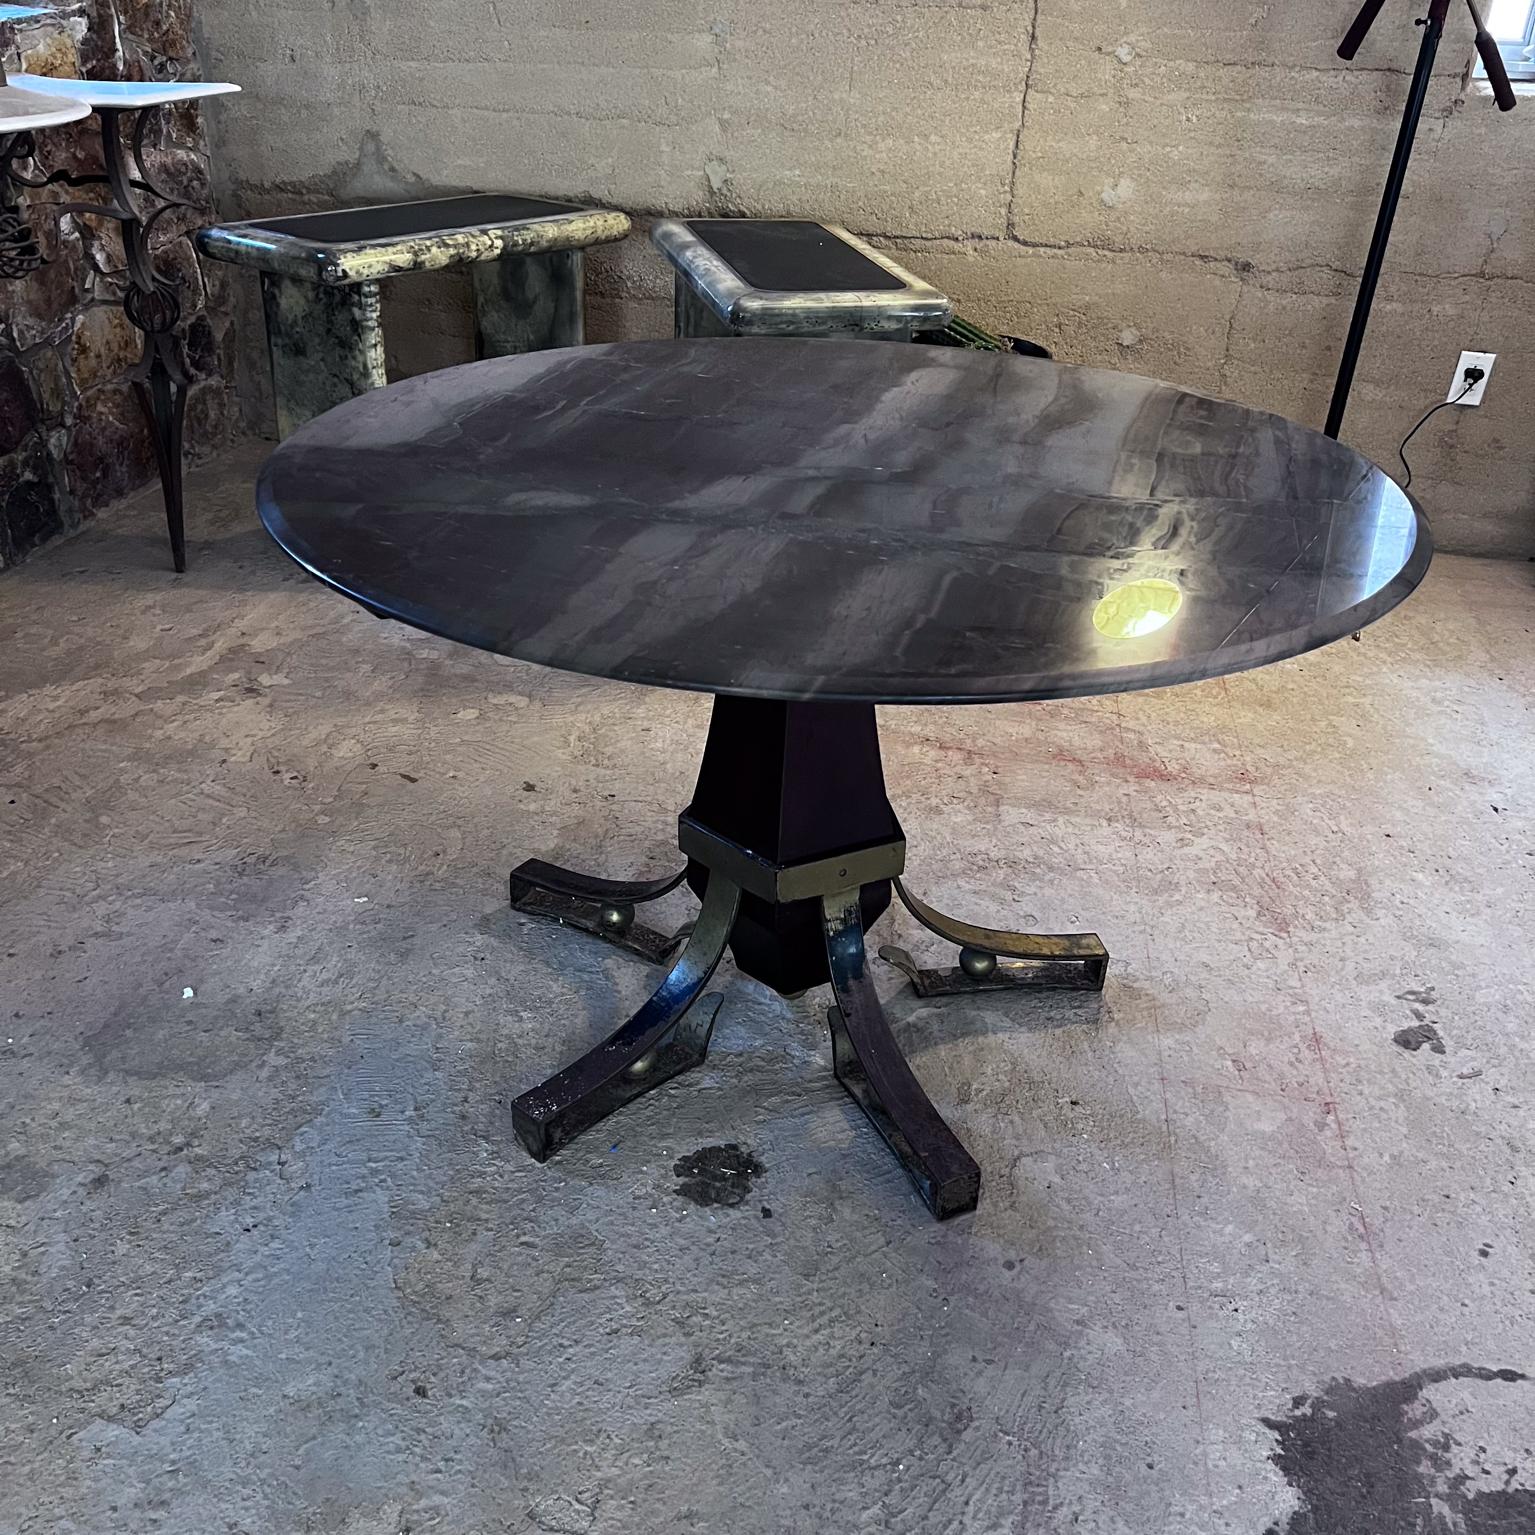 1950s Arturo Pani Forged Iron Mahogany Marble Dining Table Mexico City For Sale 2